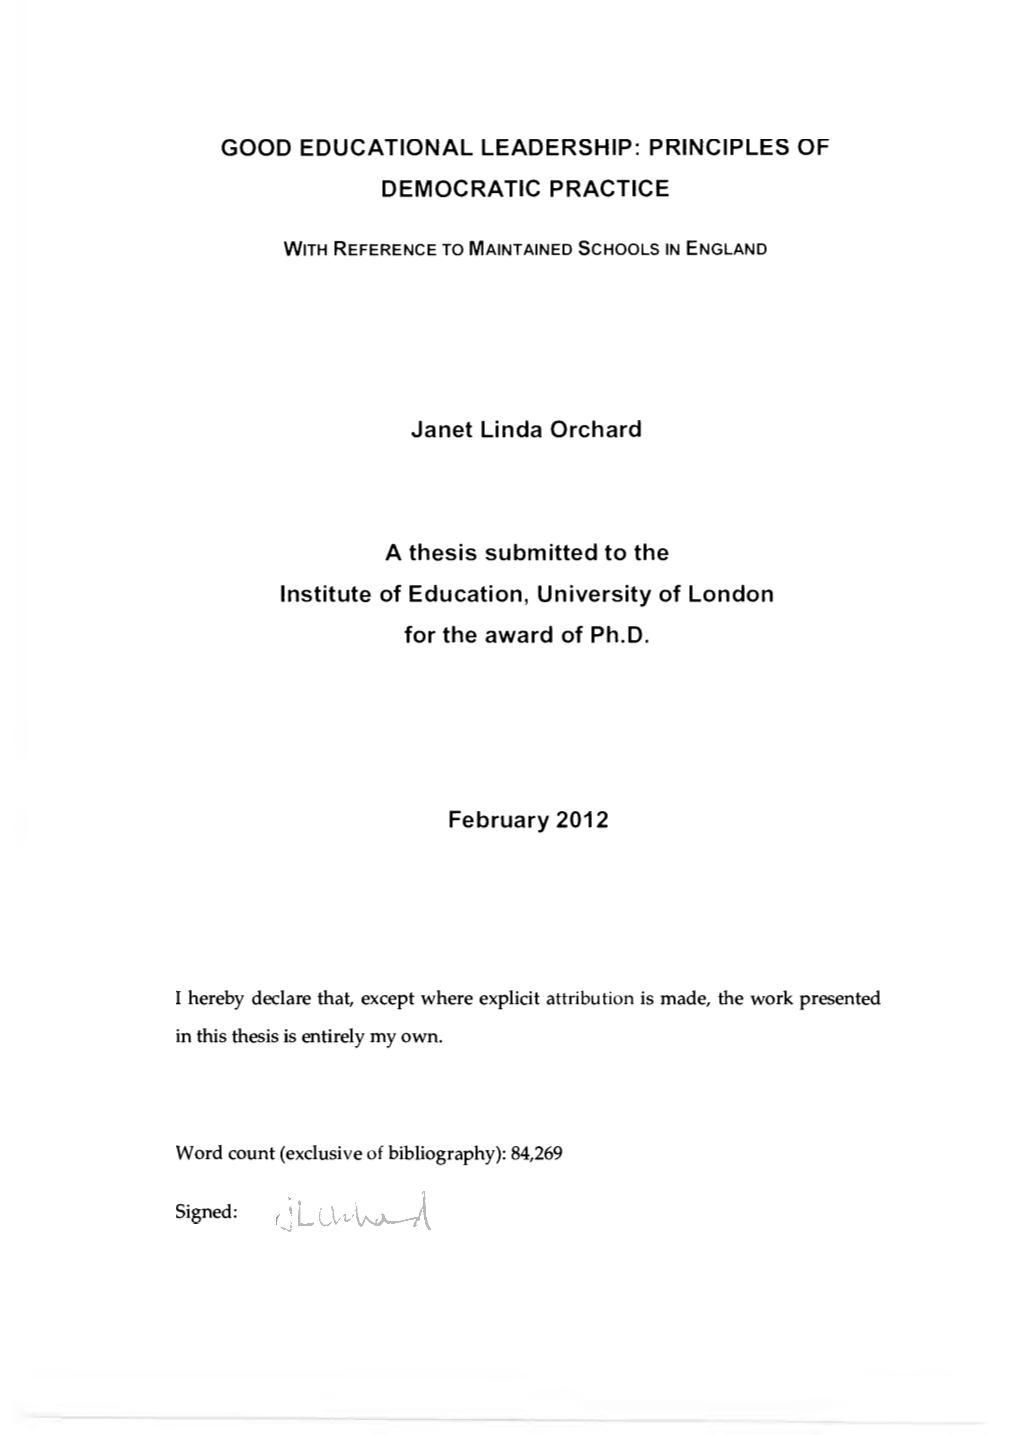 PRINCIPLES of DEMOCRATIC PRACTICE Janet Linda Orchard a Thesis Submitted to the Institute of Educat